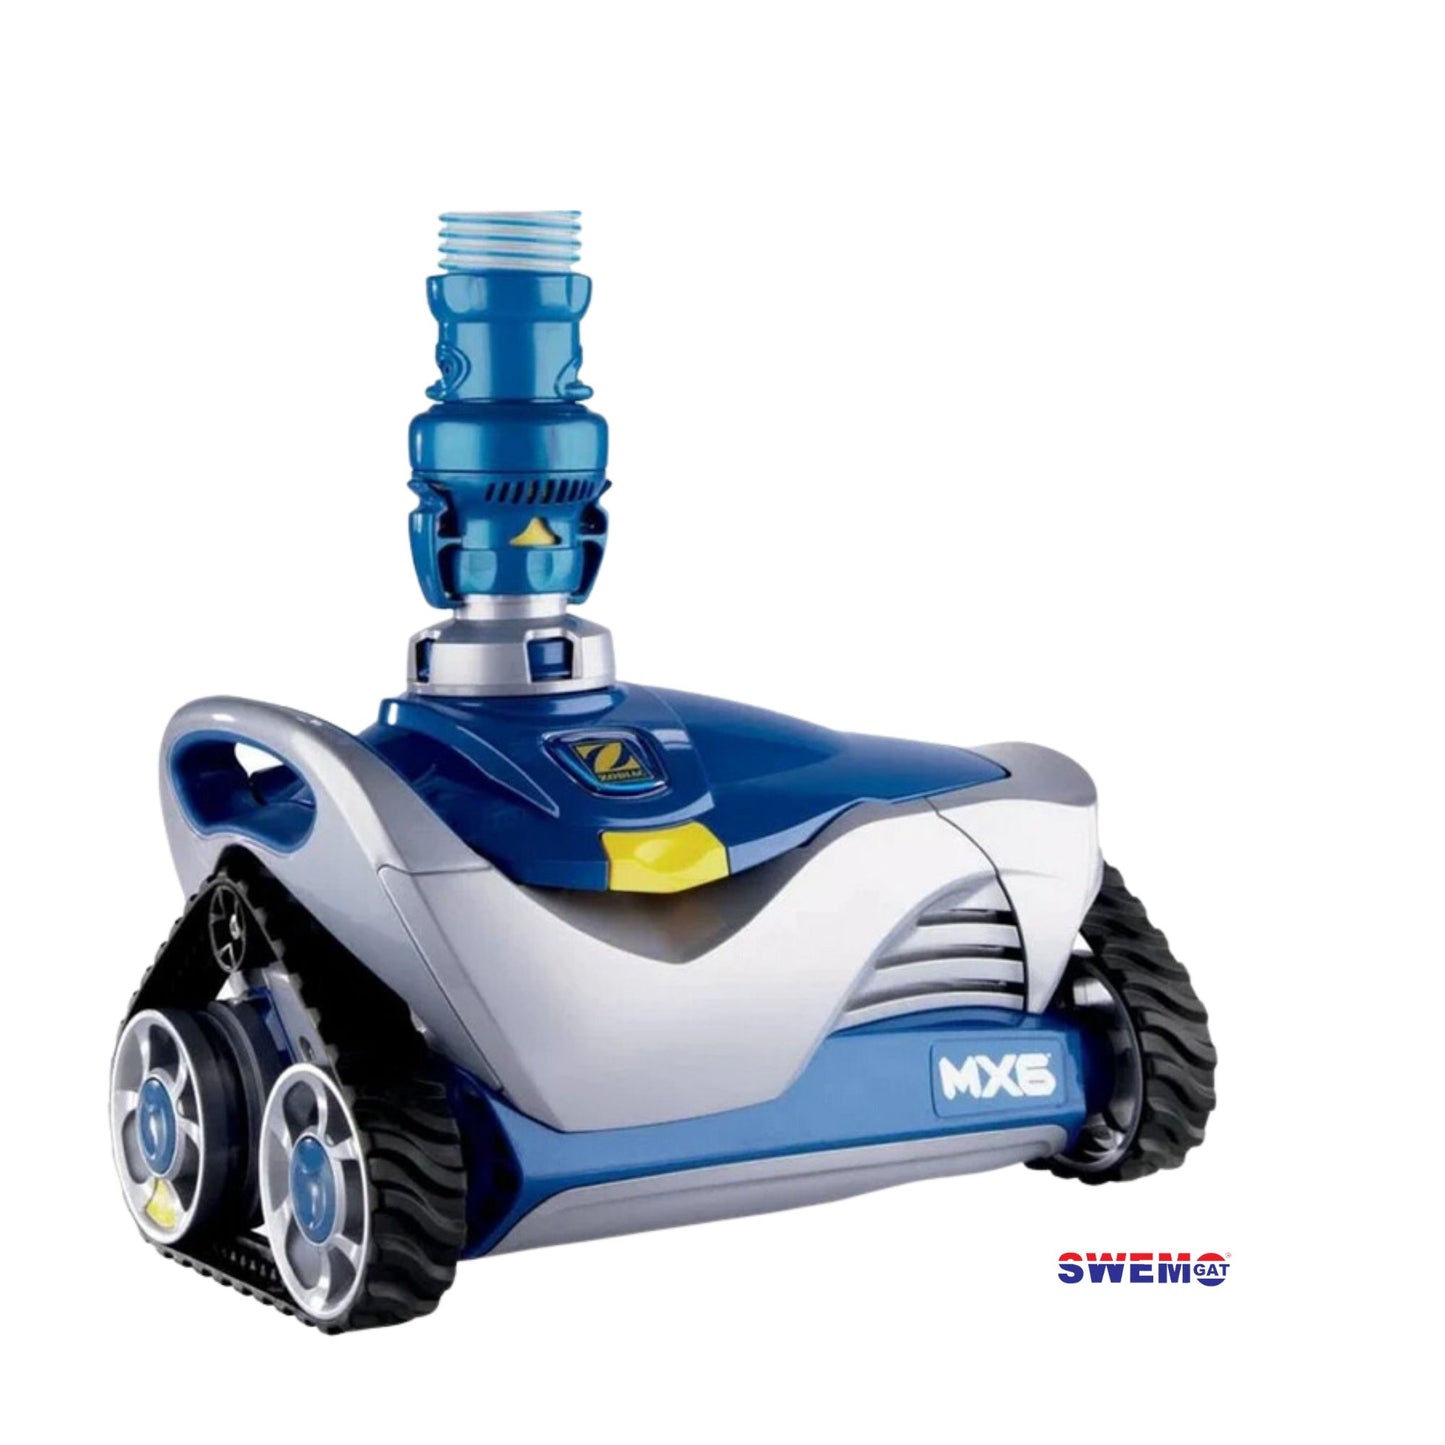 Zodiac MX6 cleaner for small swimming pools